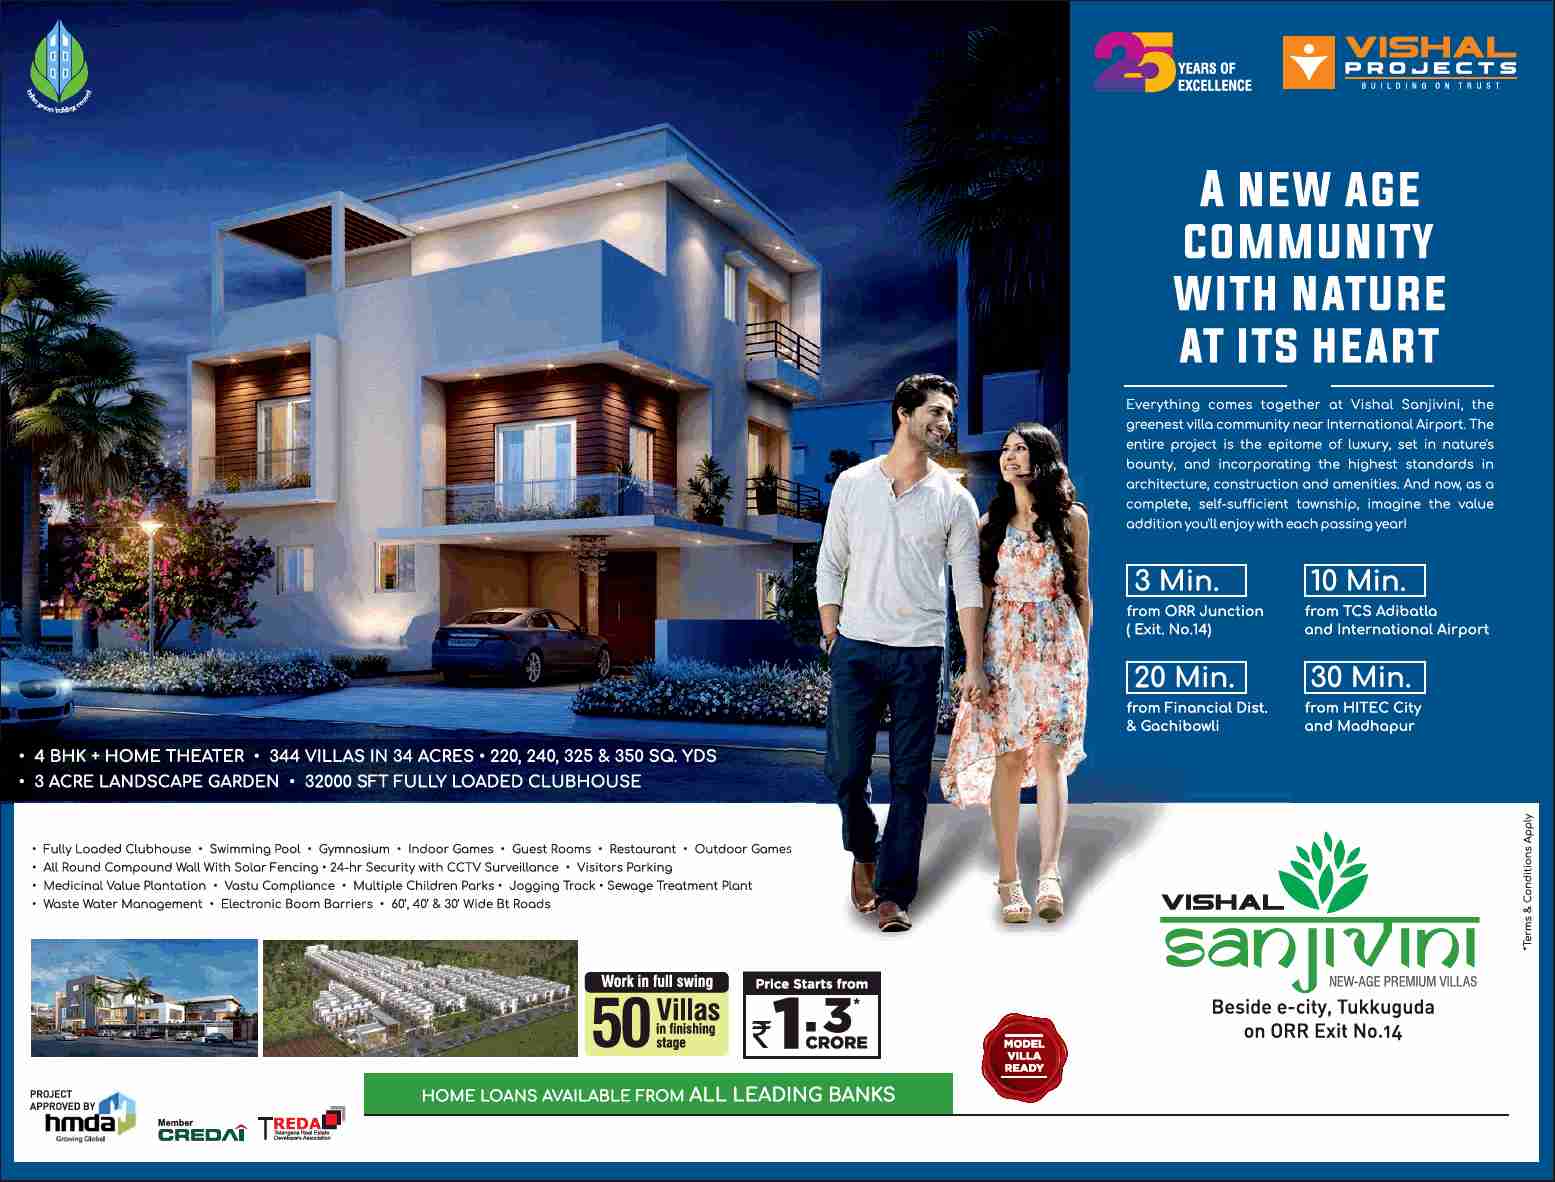 Live in a new age community with nature at its heart at Vishal Sanjivini in Hyderabad